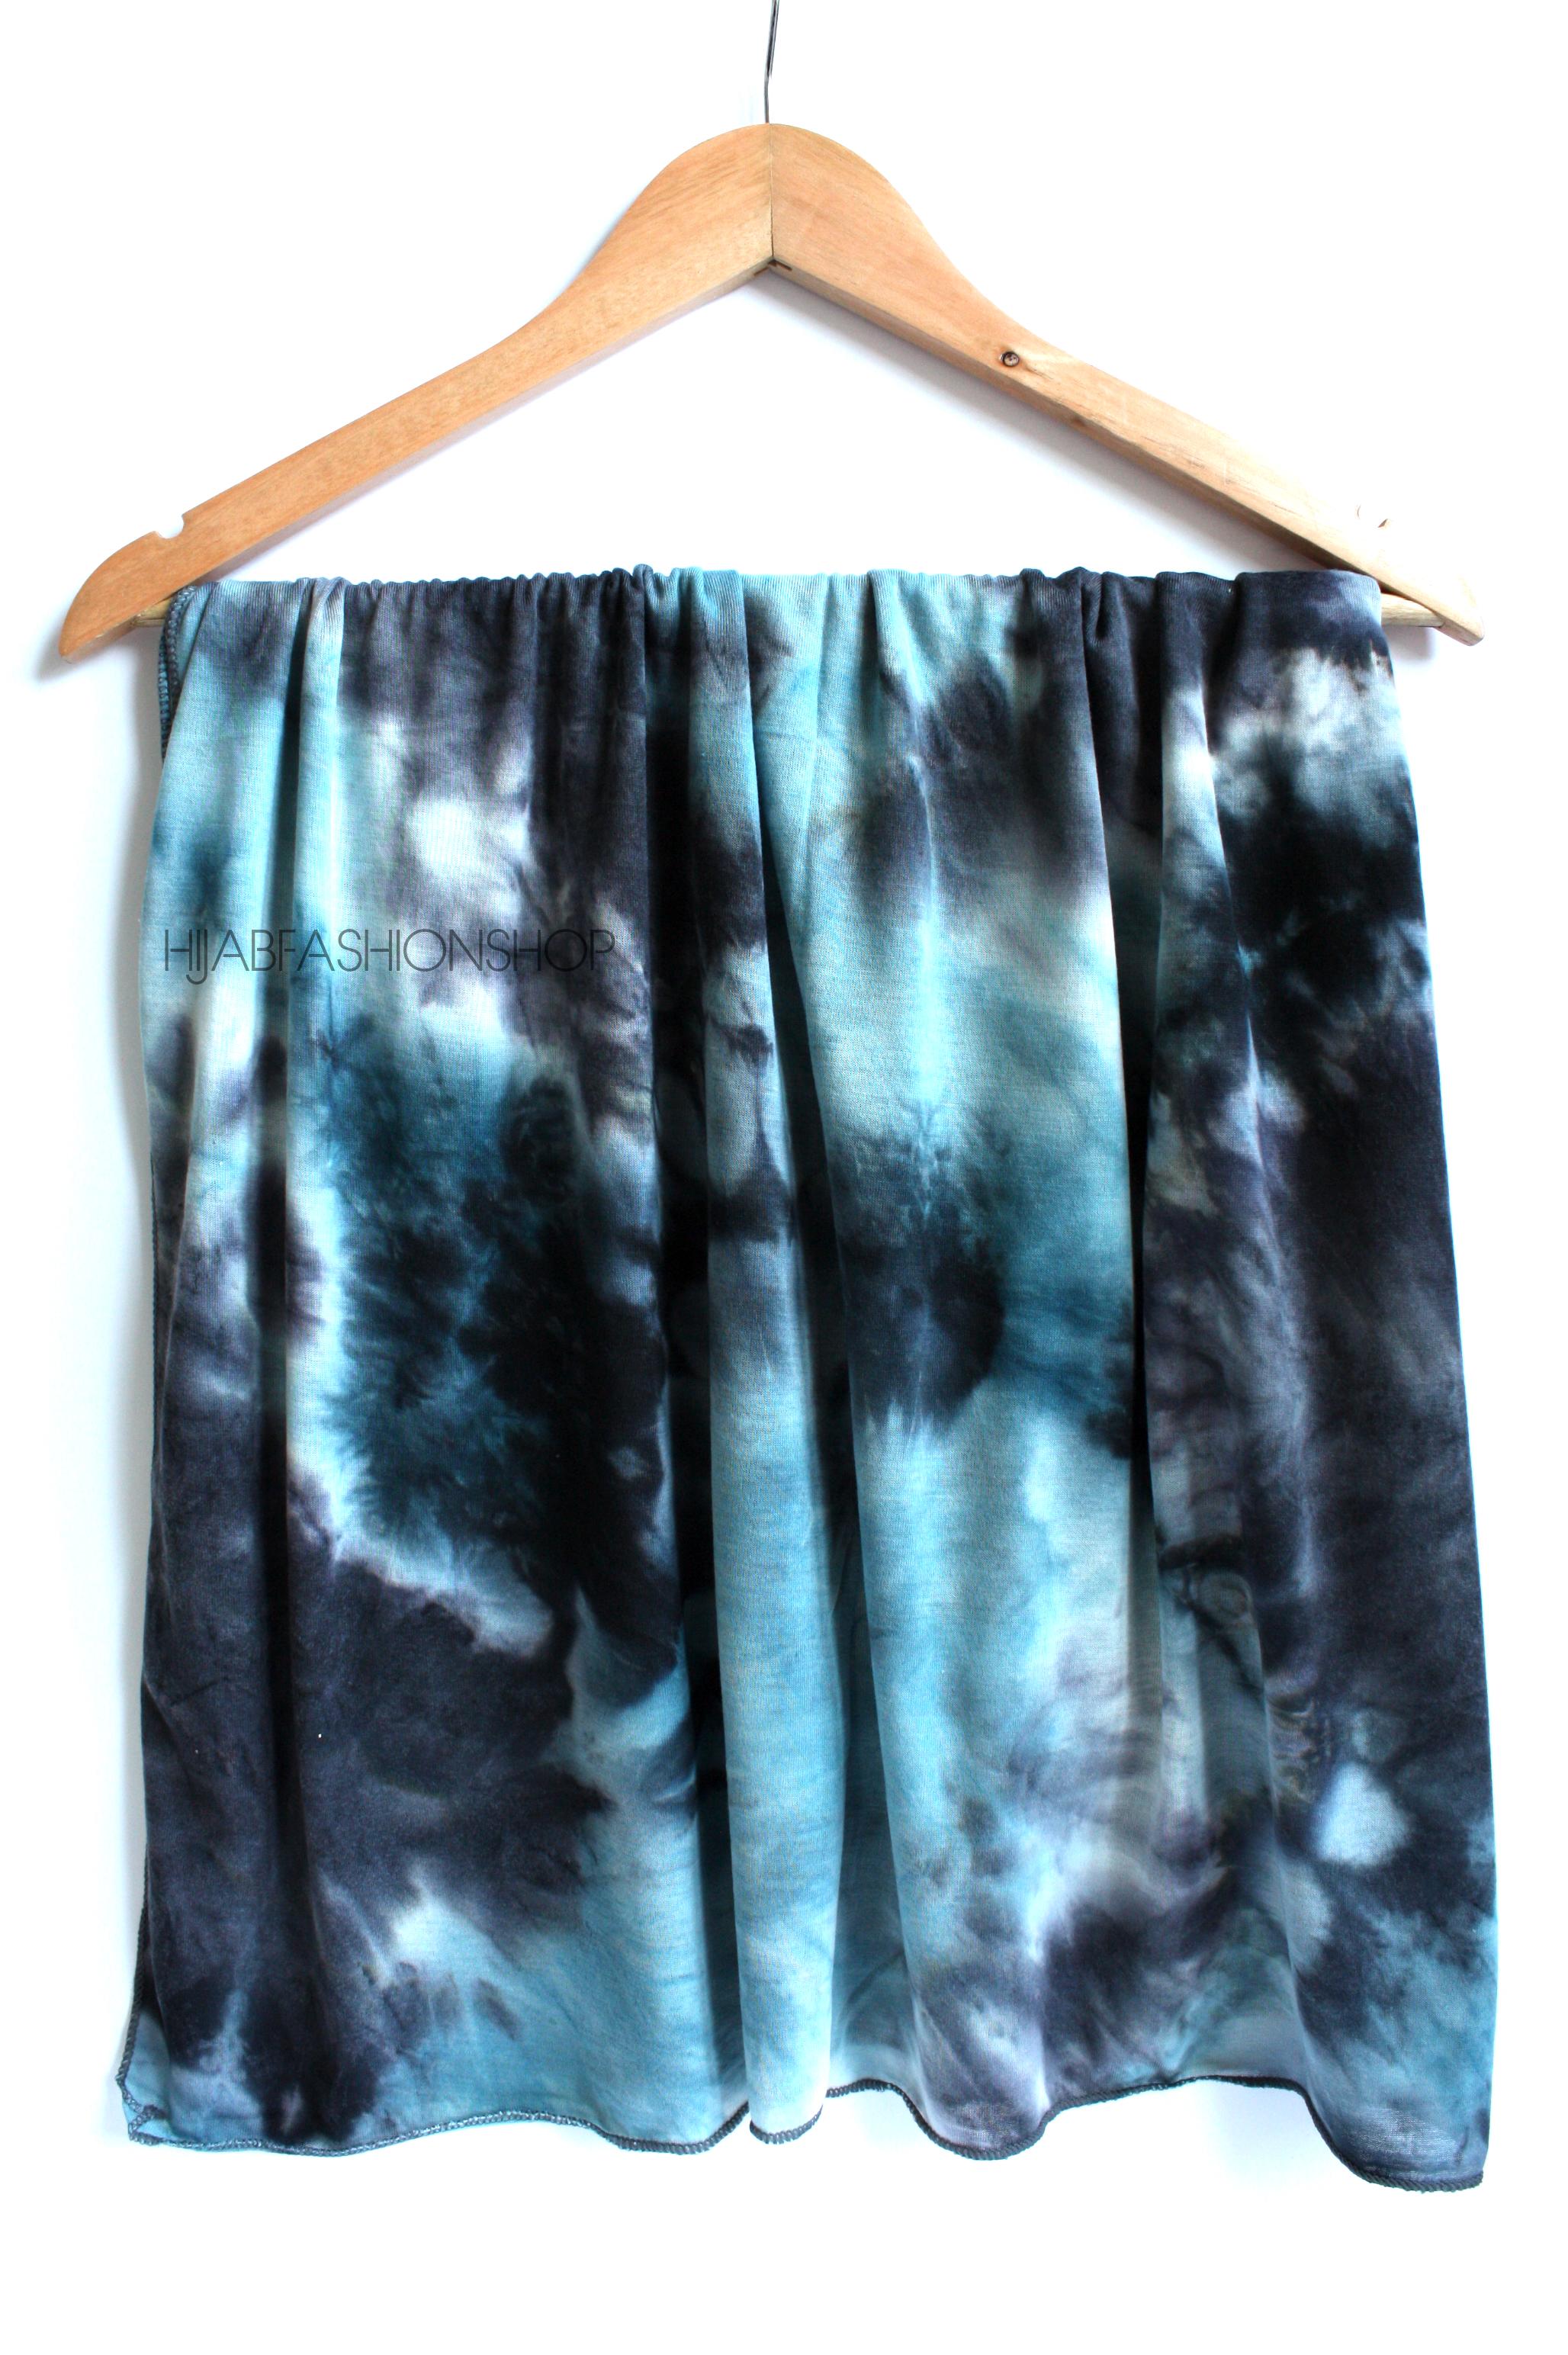 teal and black tie dye jersey hijab